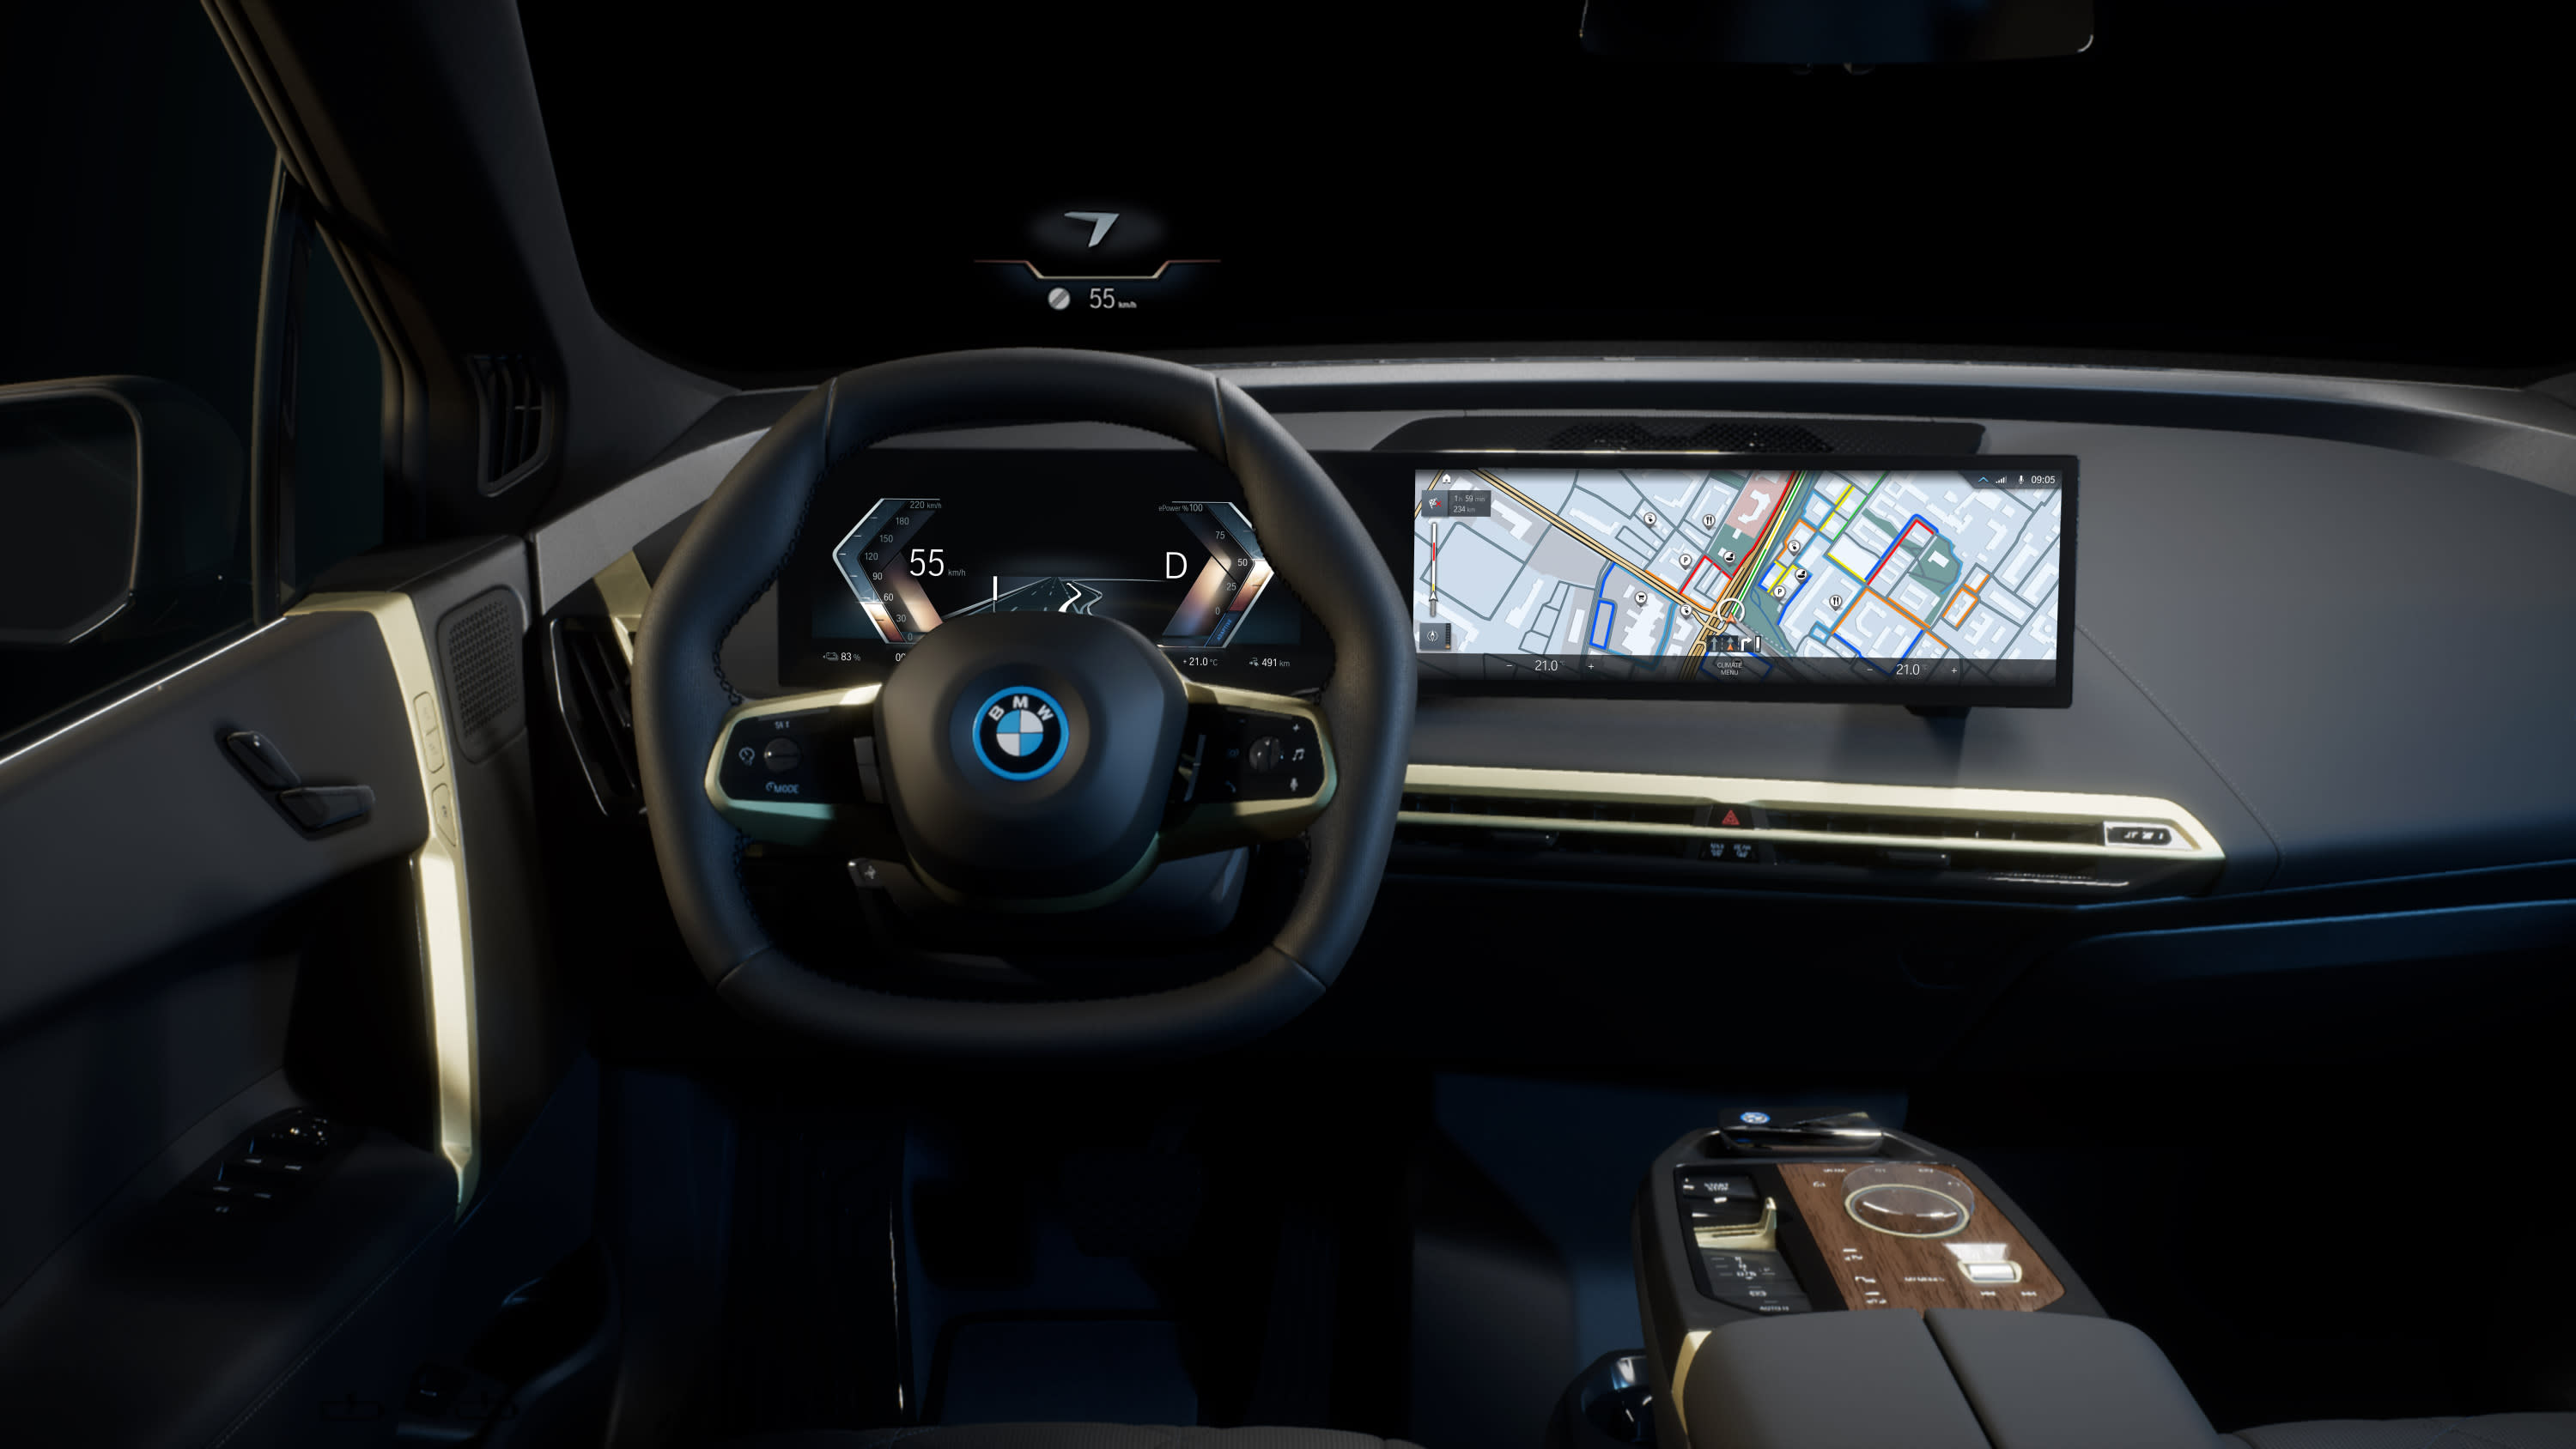 BMW’s iDrive 8 helps drivers with the use of machine learning and natural language processing